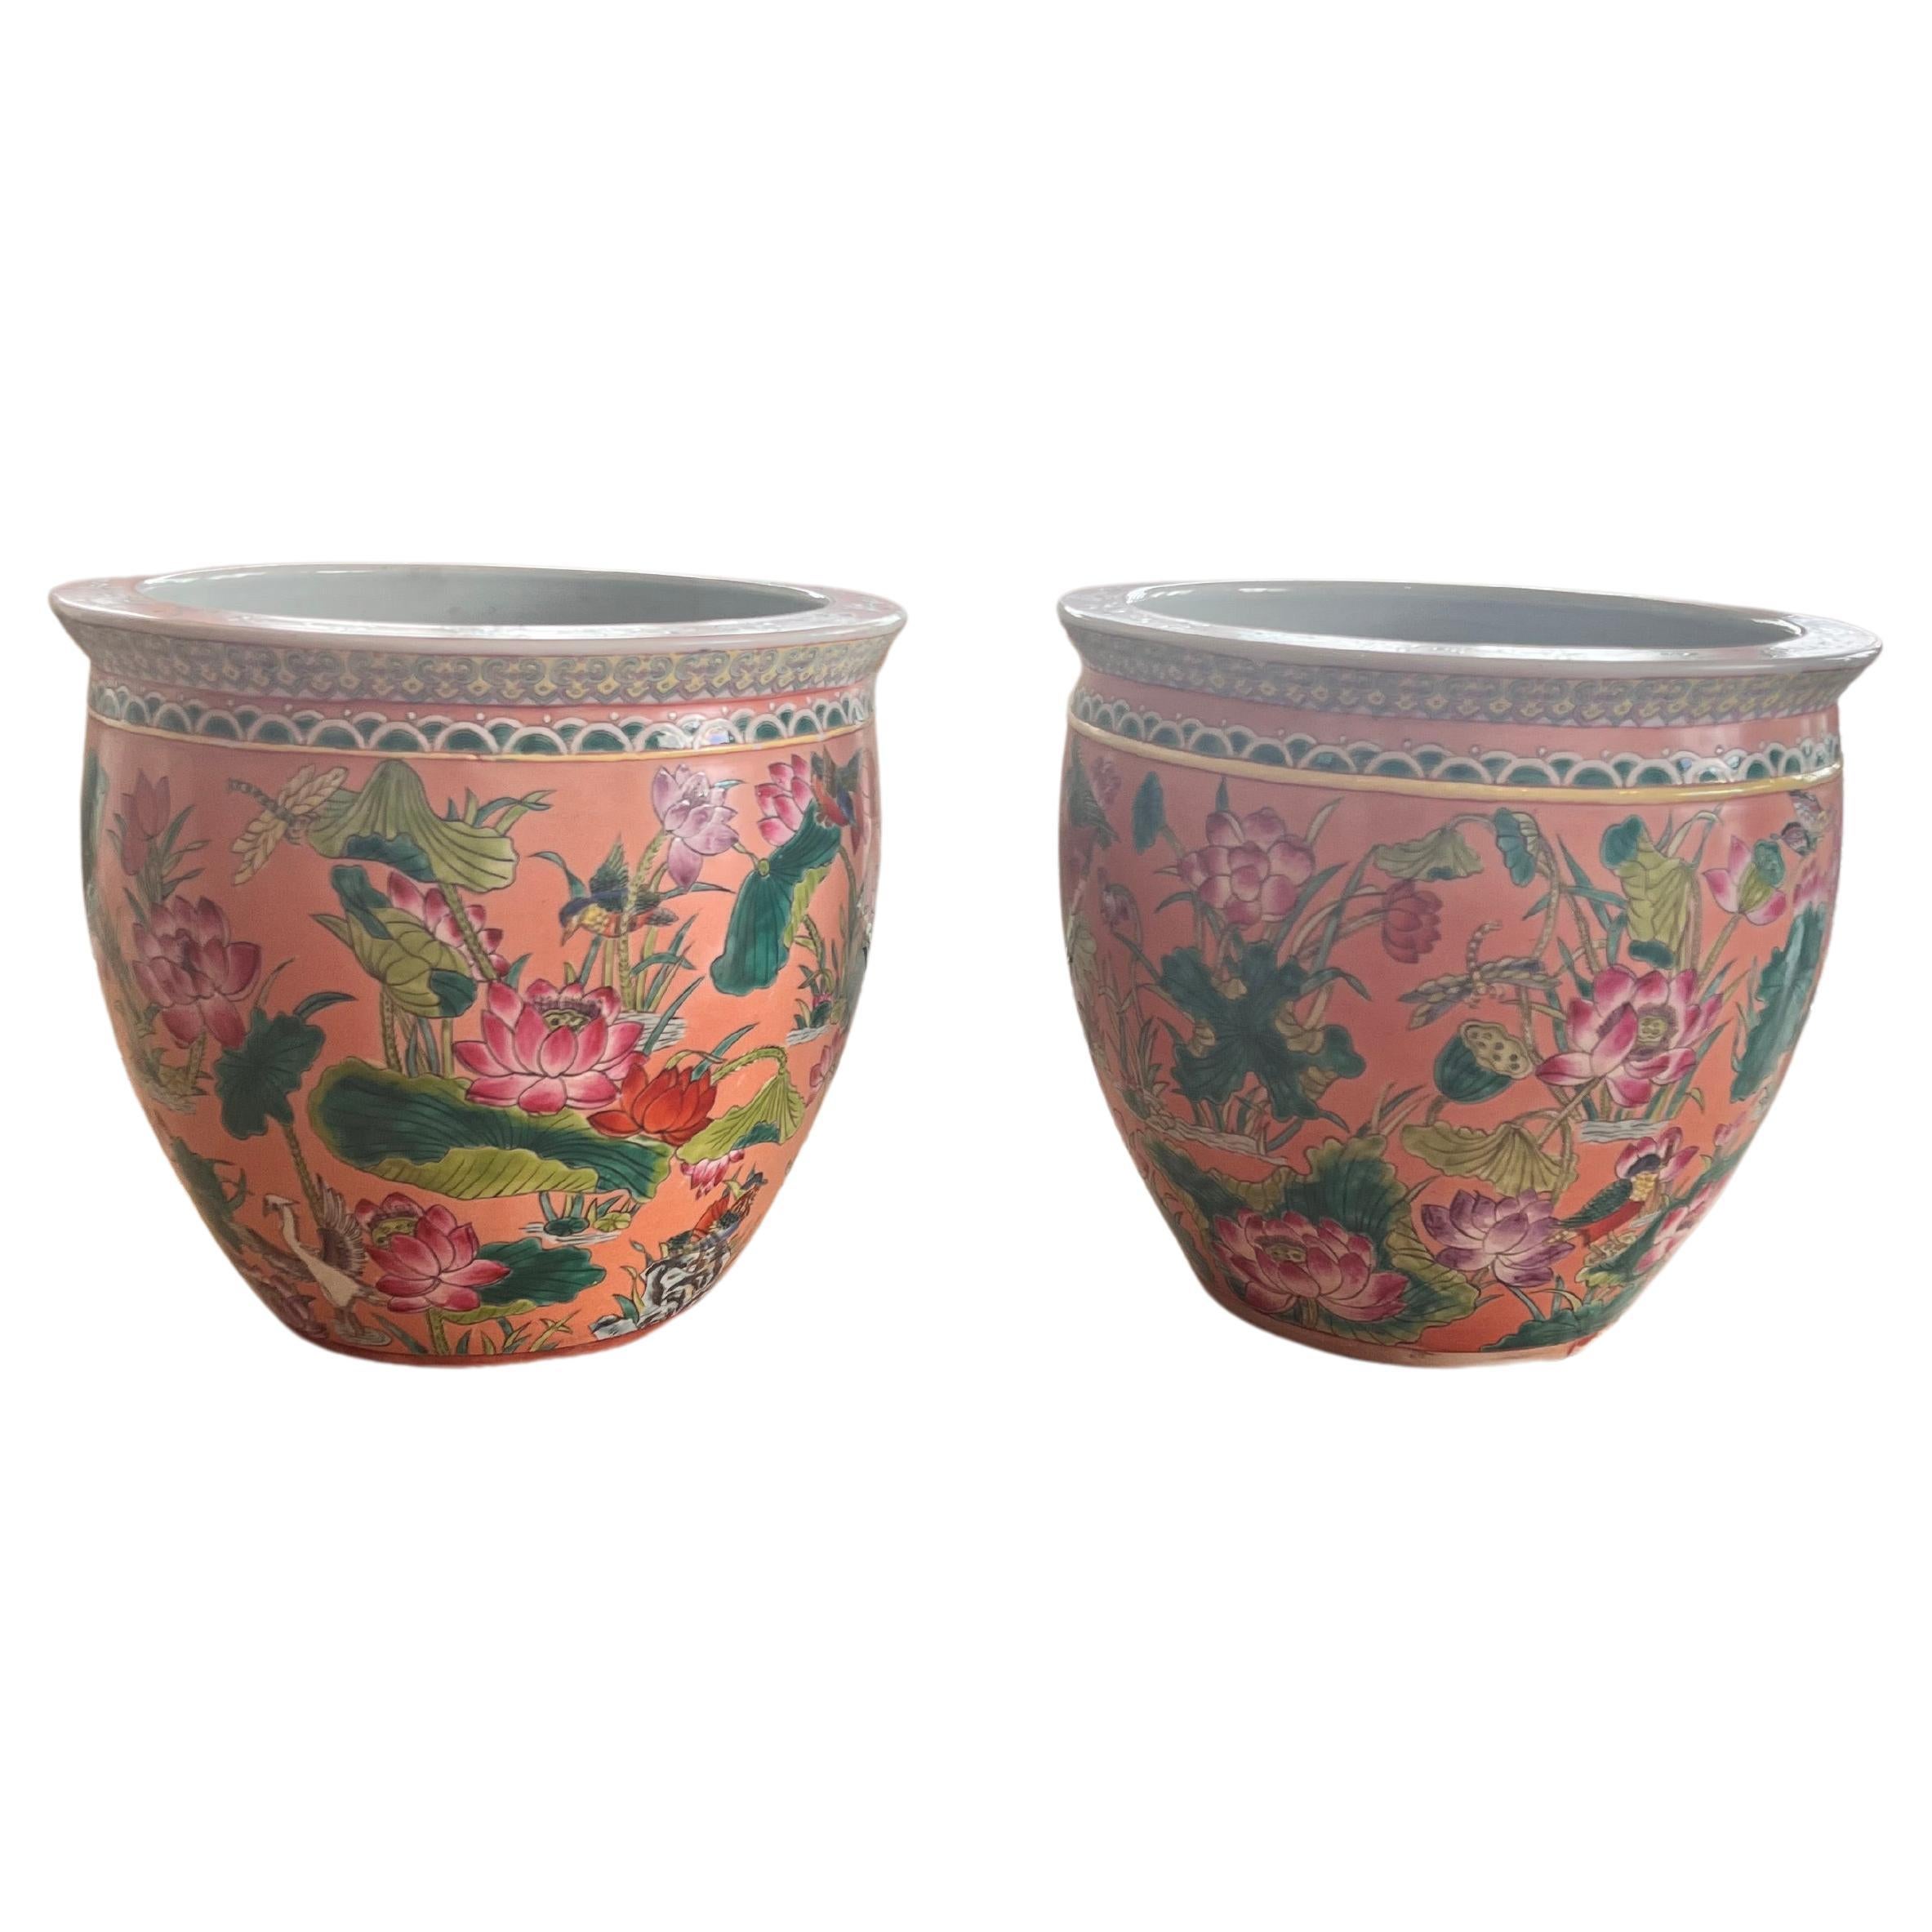 Chinese Ceramic vases
Beautiful pieces for  decor of living room or main reception area.
Beautiful Coral and green design and flowers and fishes . 
Sizes 40x36 cm / 15.74 x 14.17 inches. 

PRADERA is a second generation of a family run business